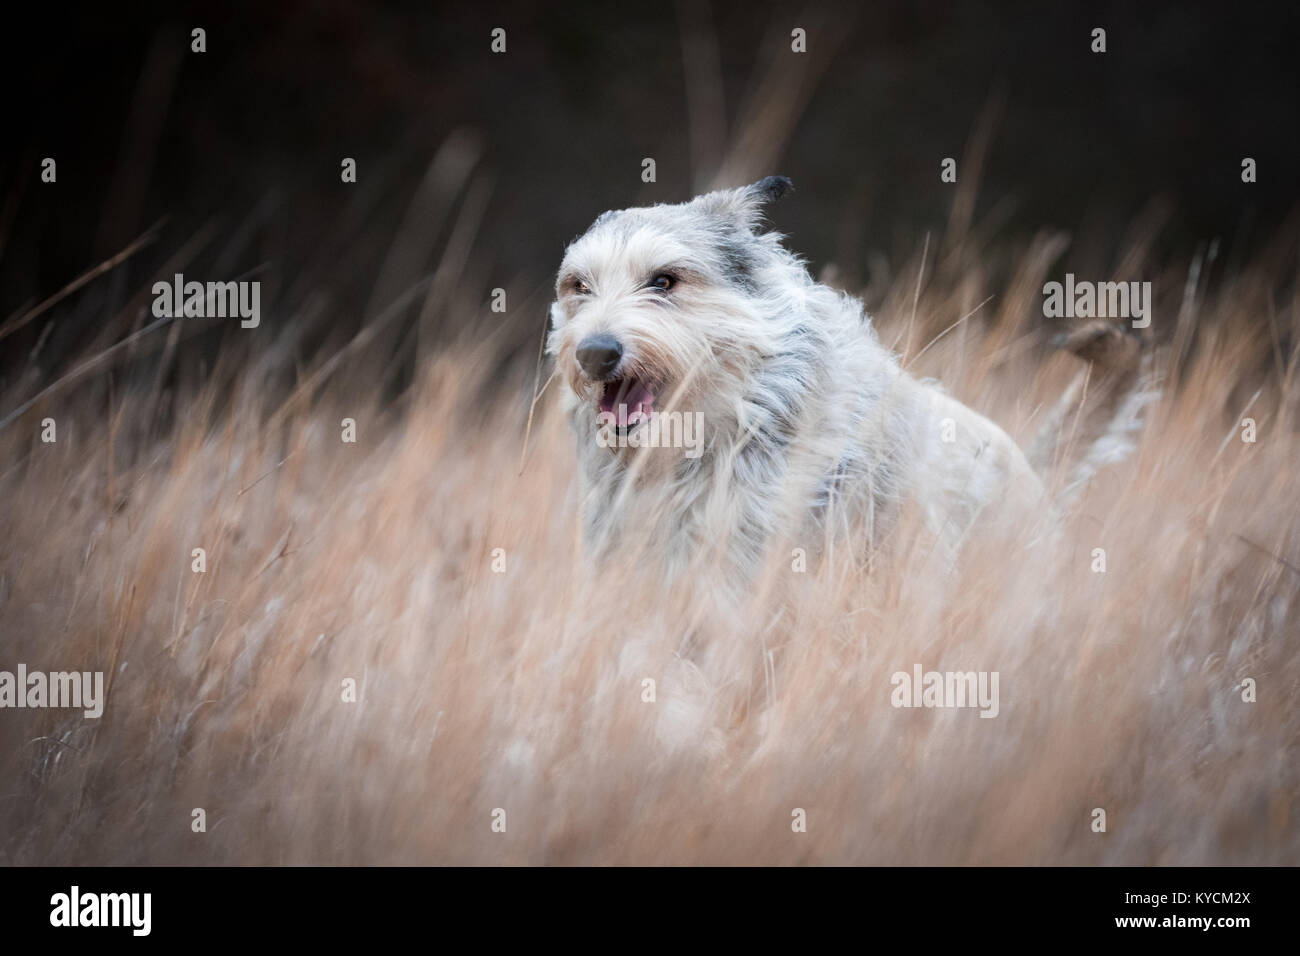 Berger picard dog in winter field with long hair Stock Photo